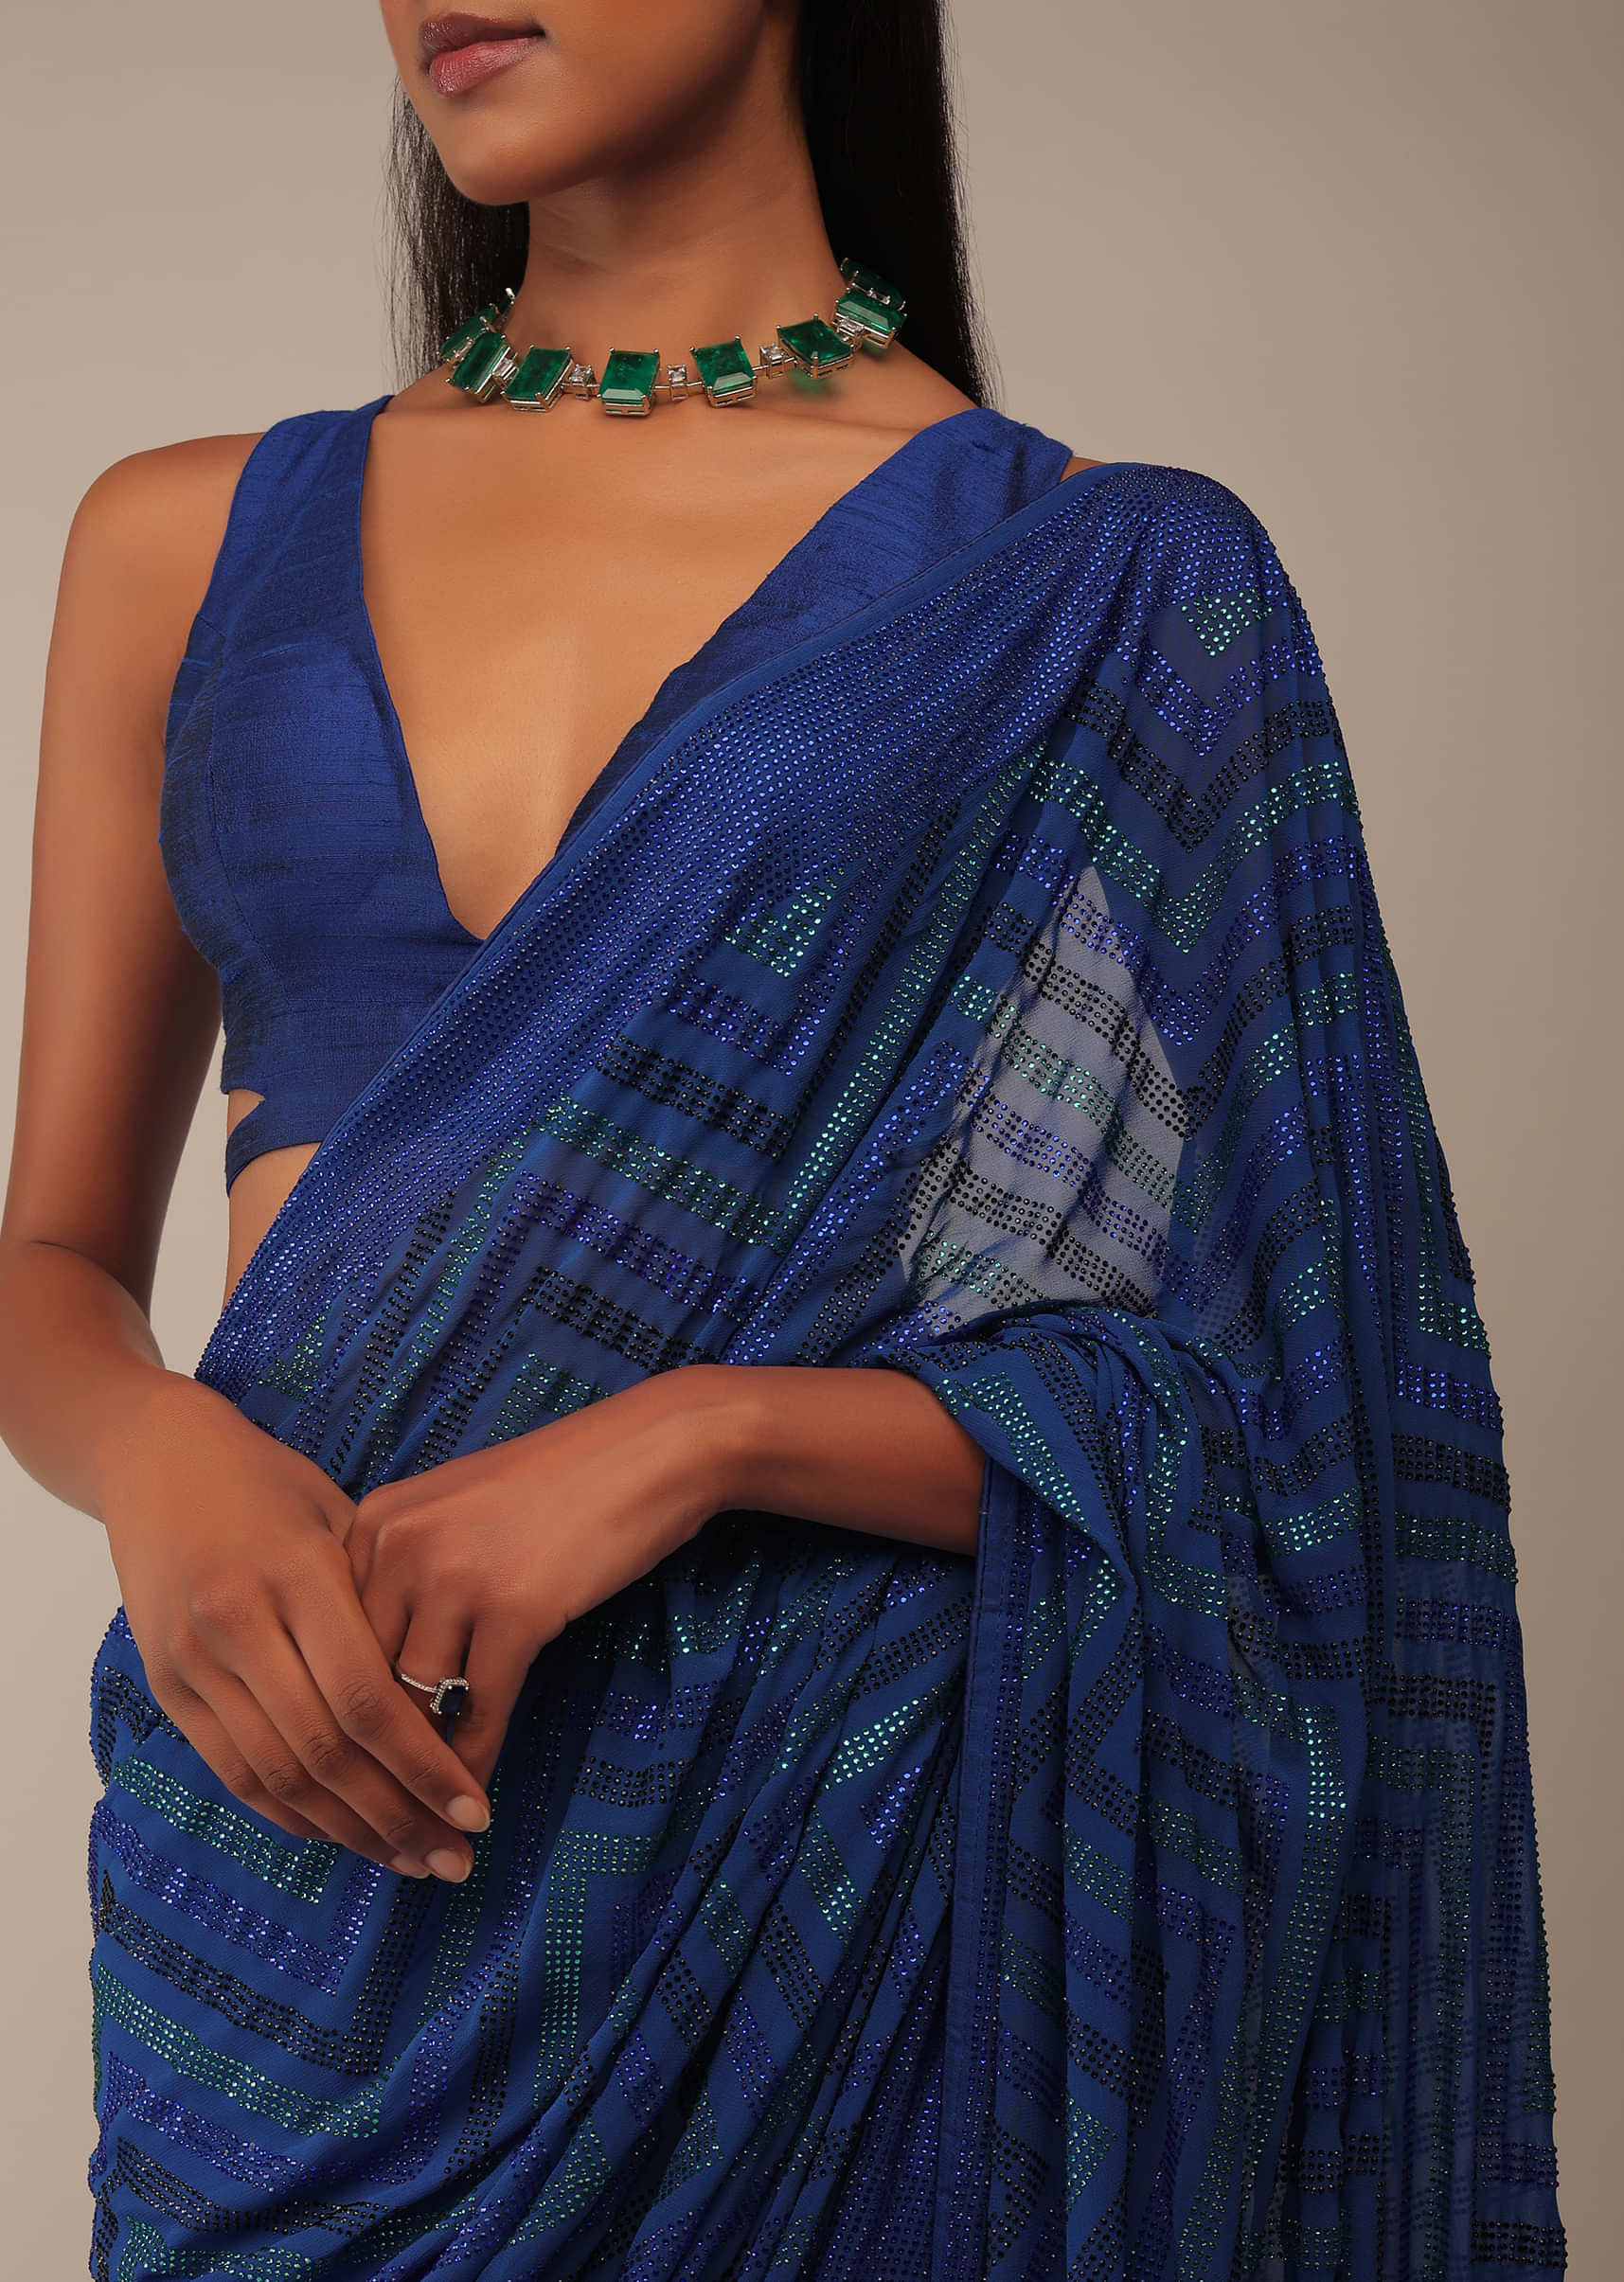 Nautical Blue Saree In Multi-Color Stones Embellishment, Crafted In Chiffon